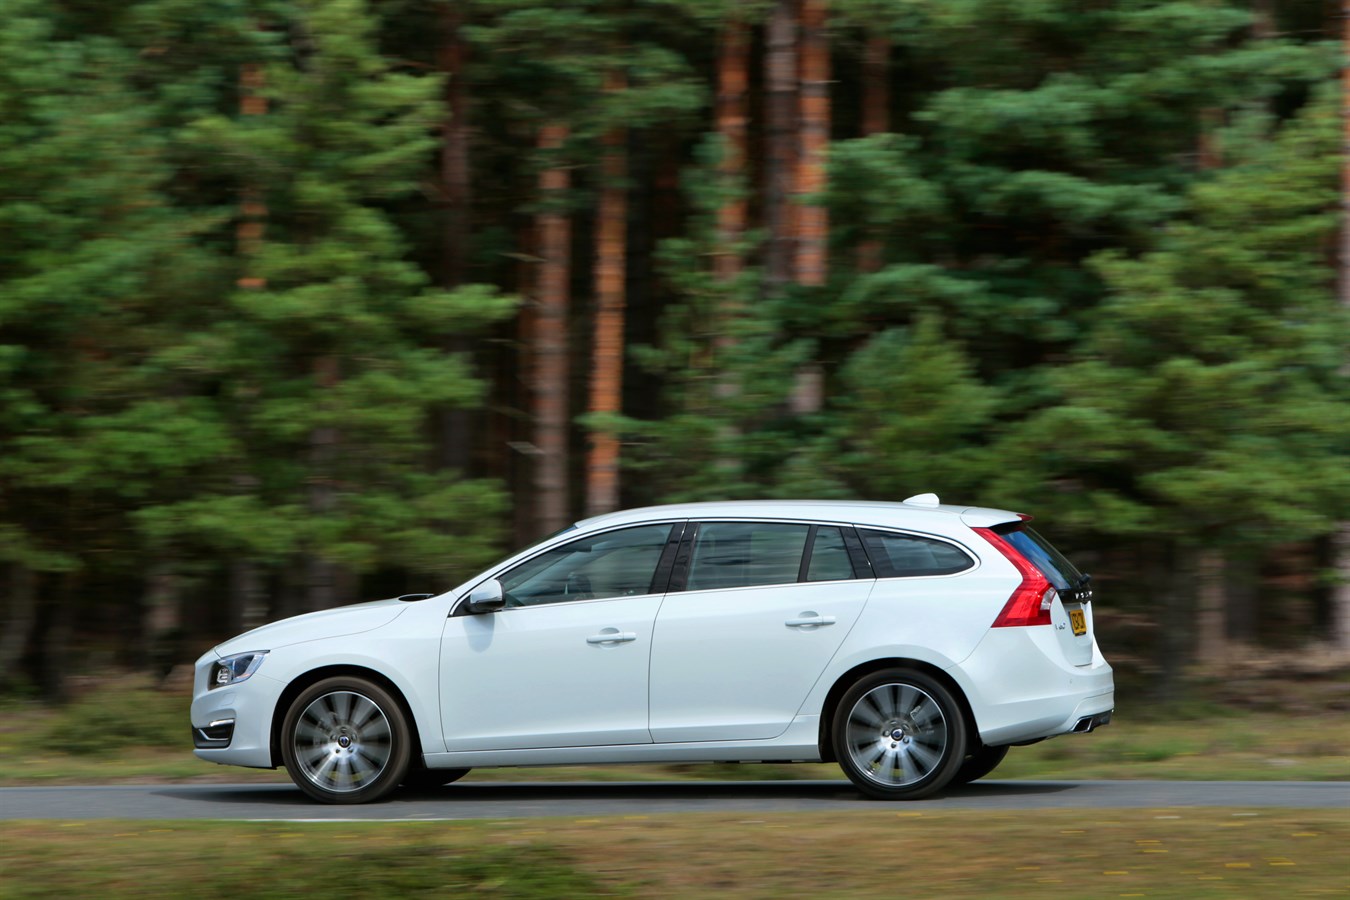 VOLVO CARS EXTENDS ITS DRIVE-E POWERTRAIN ROLL-OUT PROGRAMME